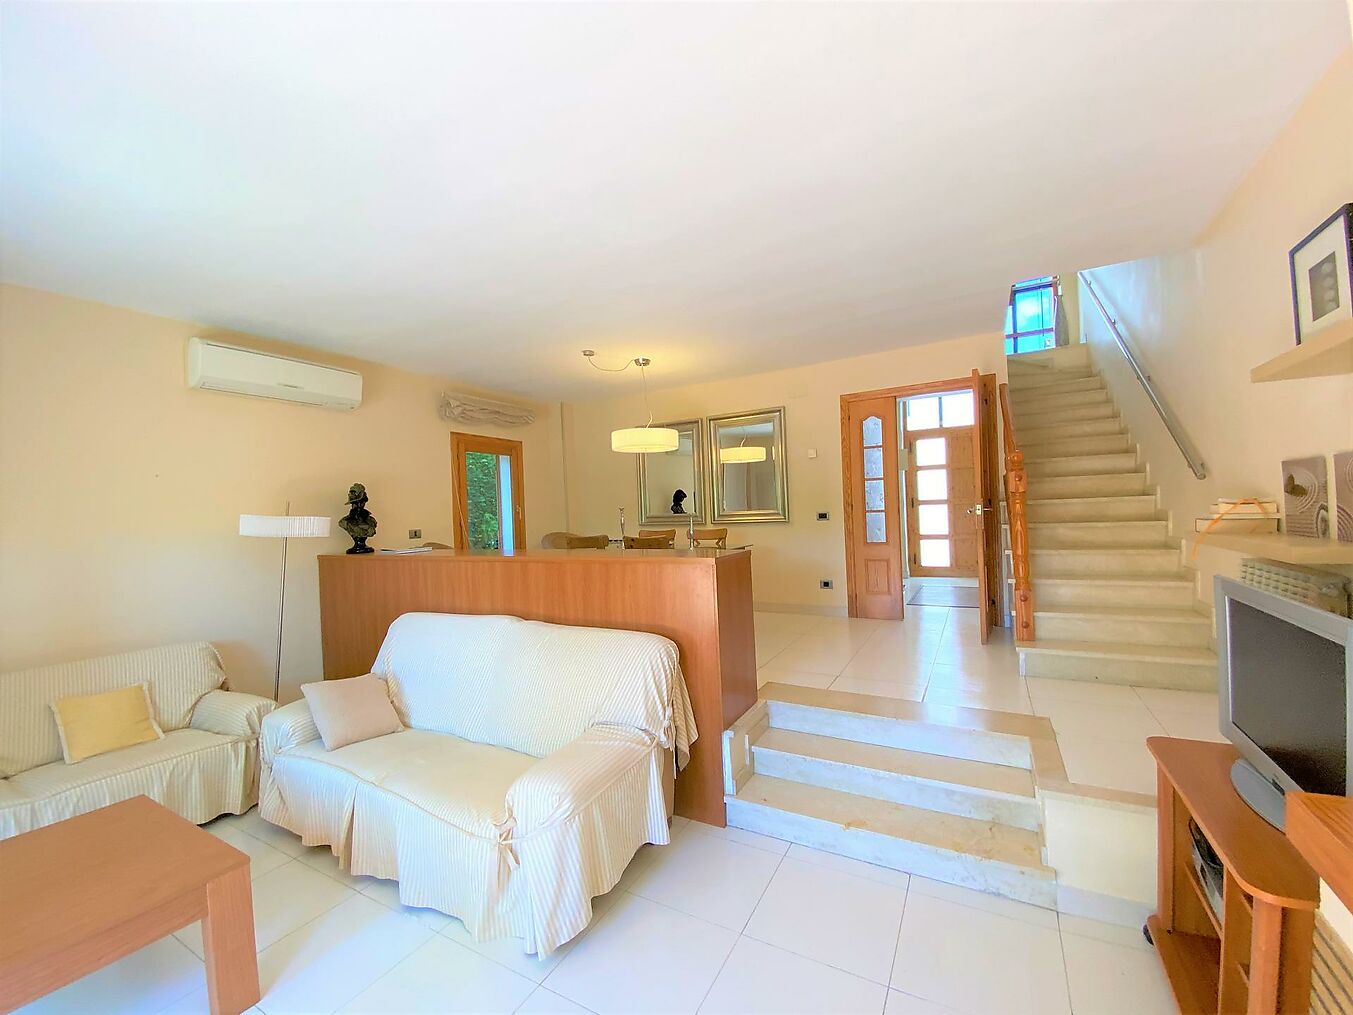 semi-detached house in the center of Playa de Aro